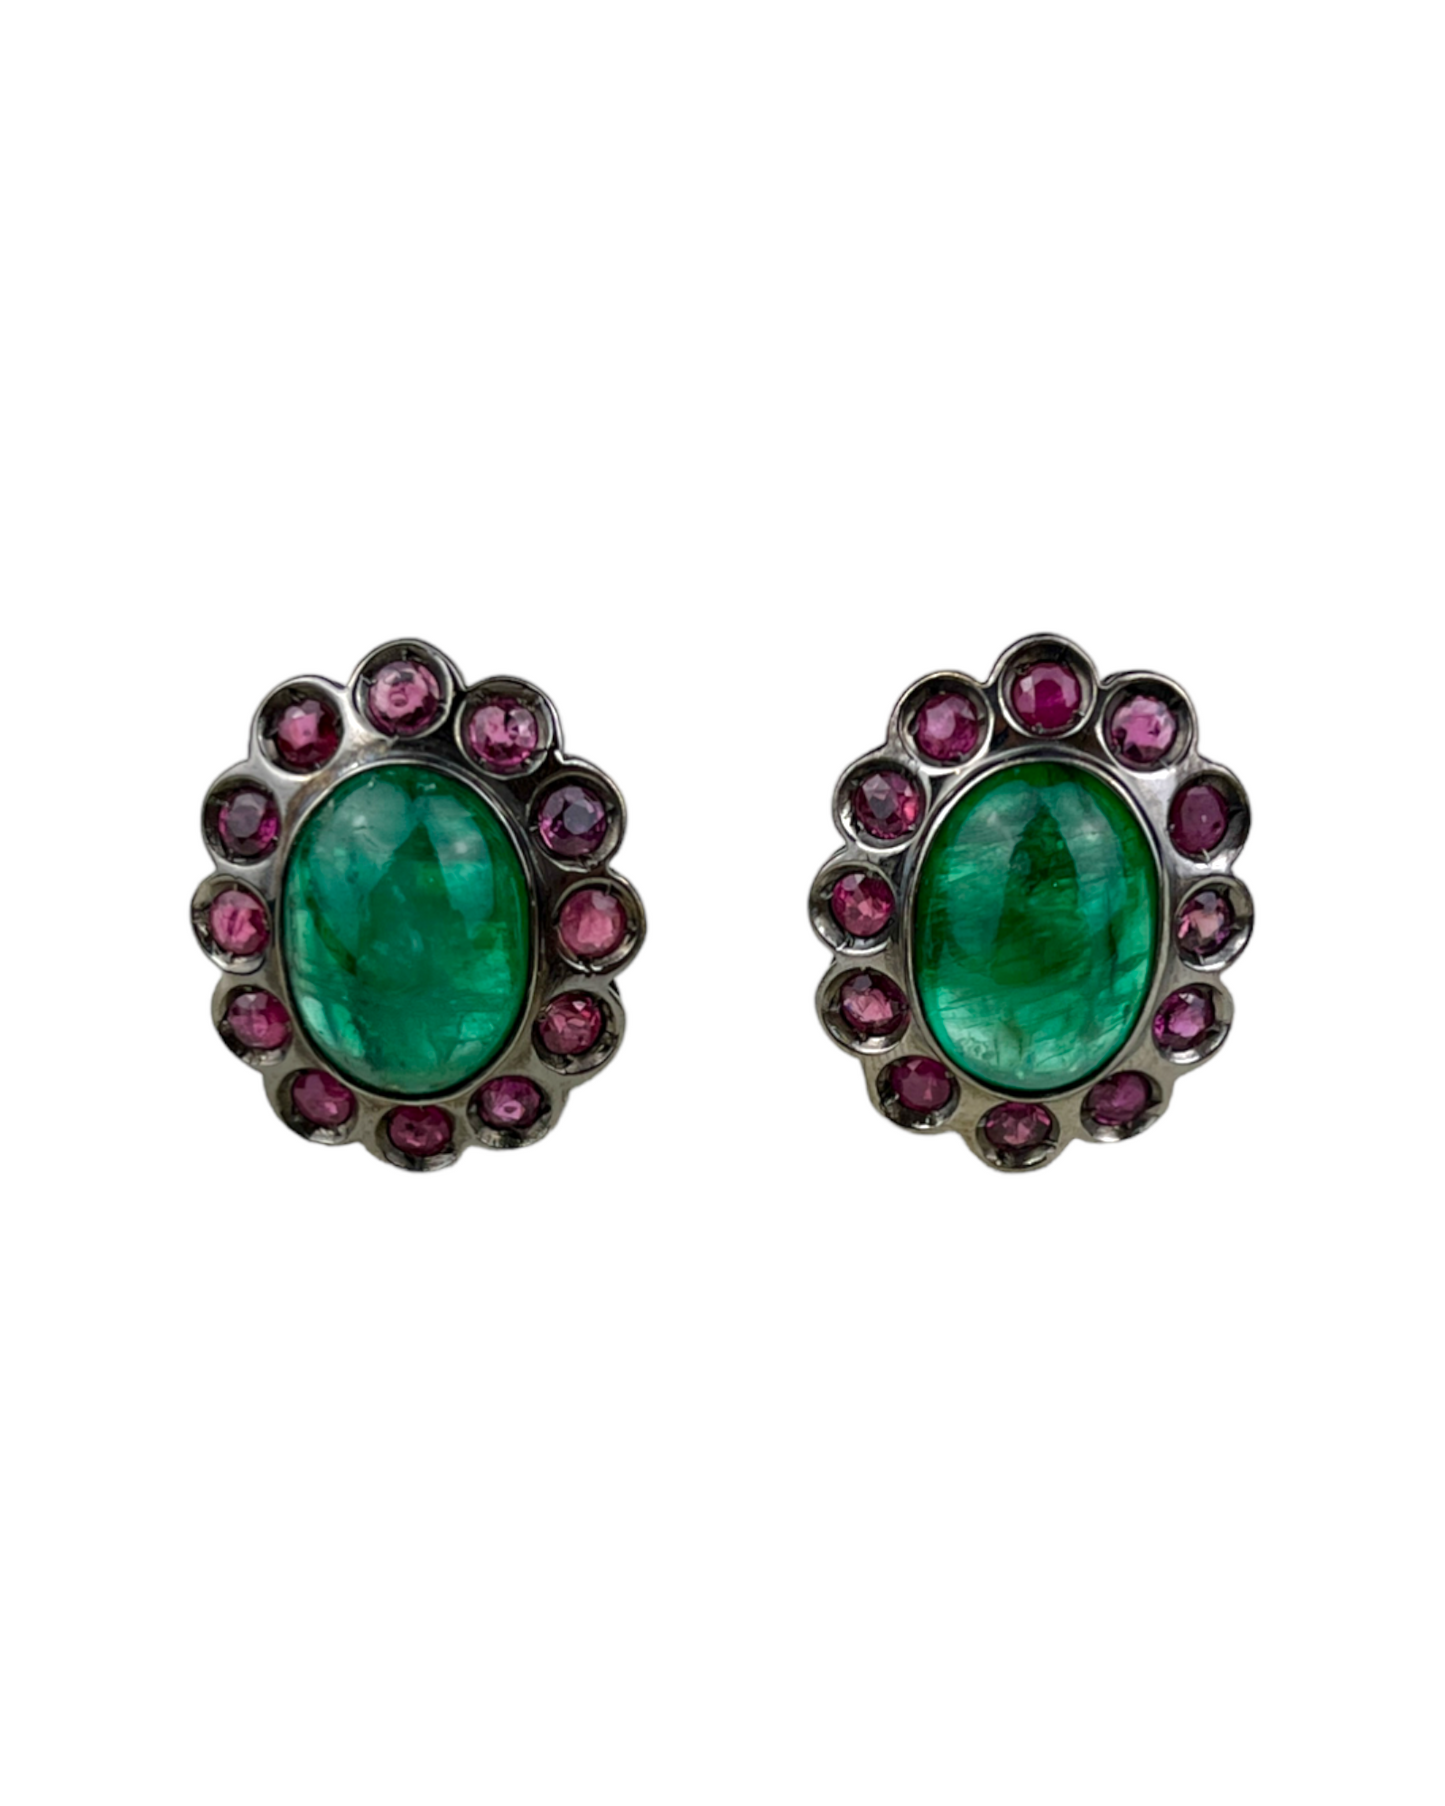 Namazte Maharaja Earrings with Emerald and Ruby